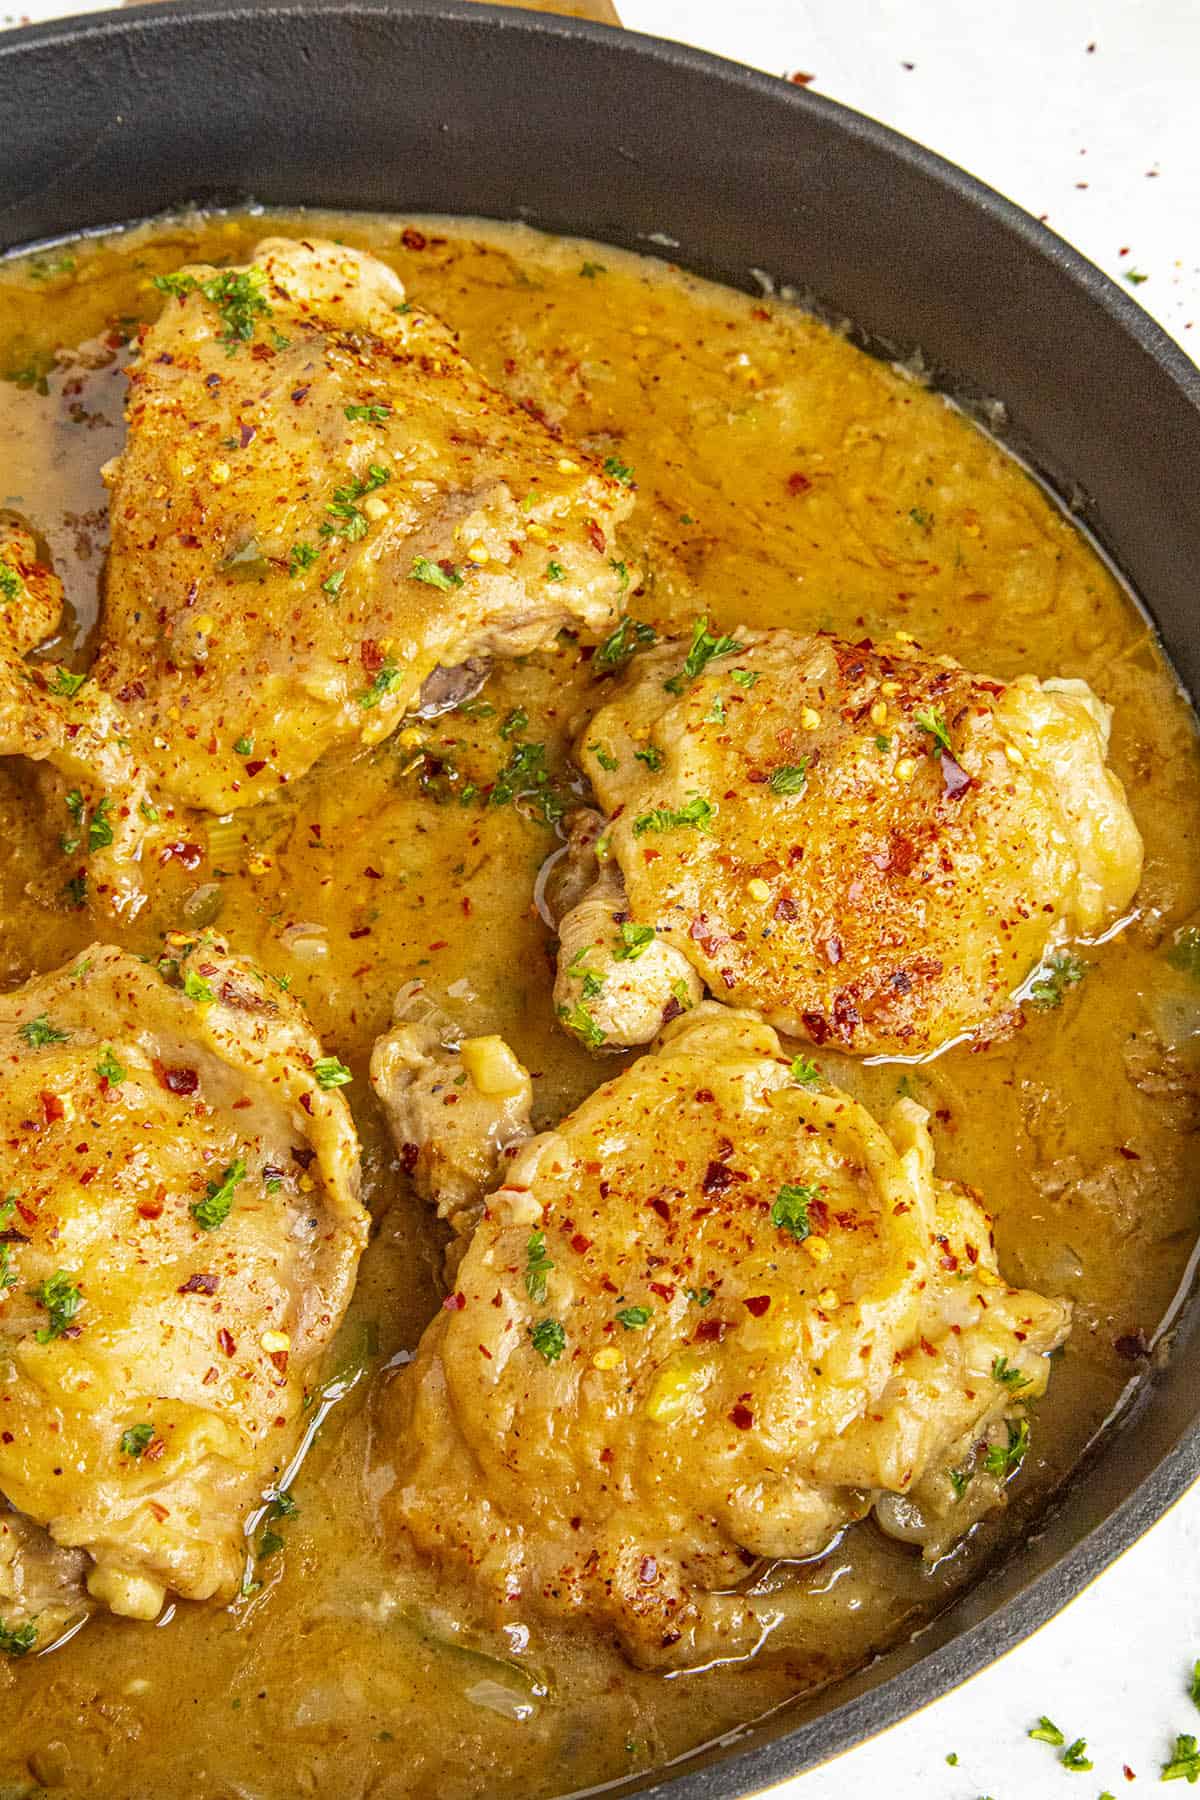 Smothered Chicken Fricassee in a hot pan, ready to enjoy